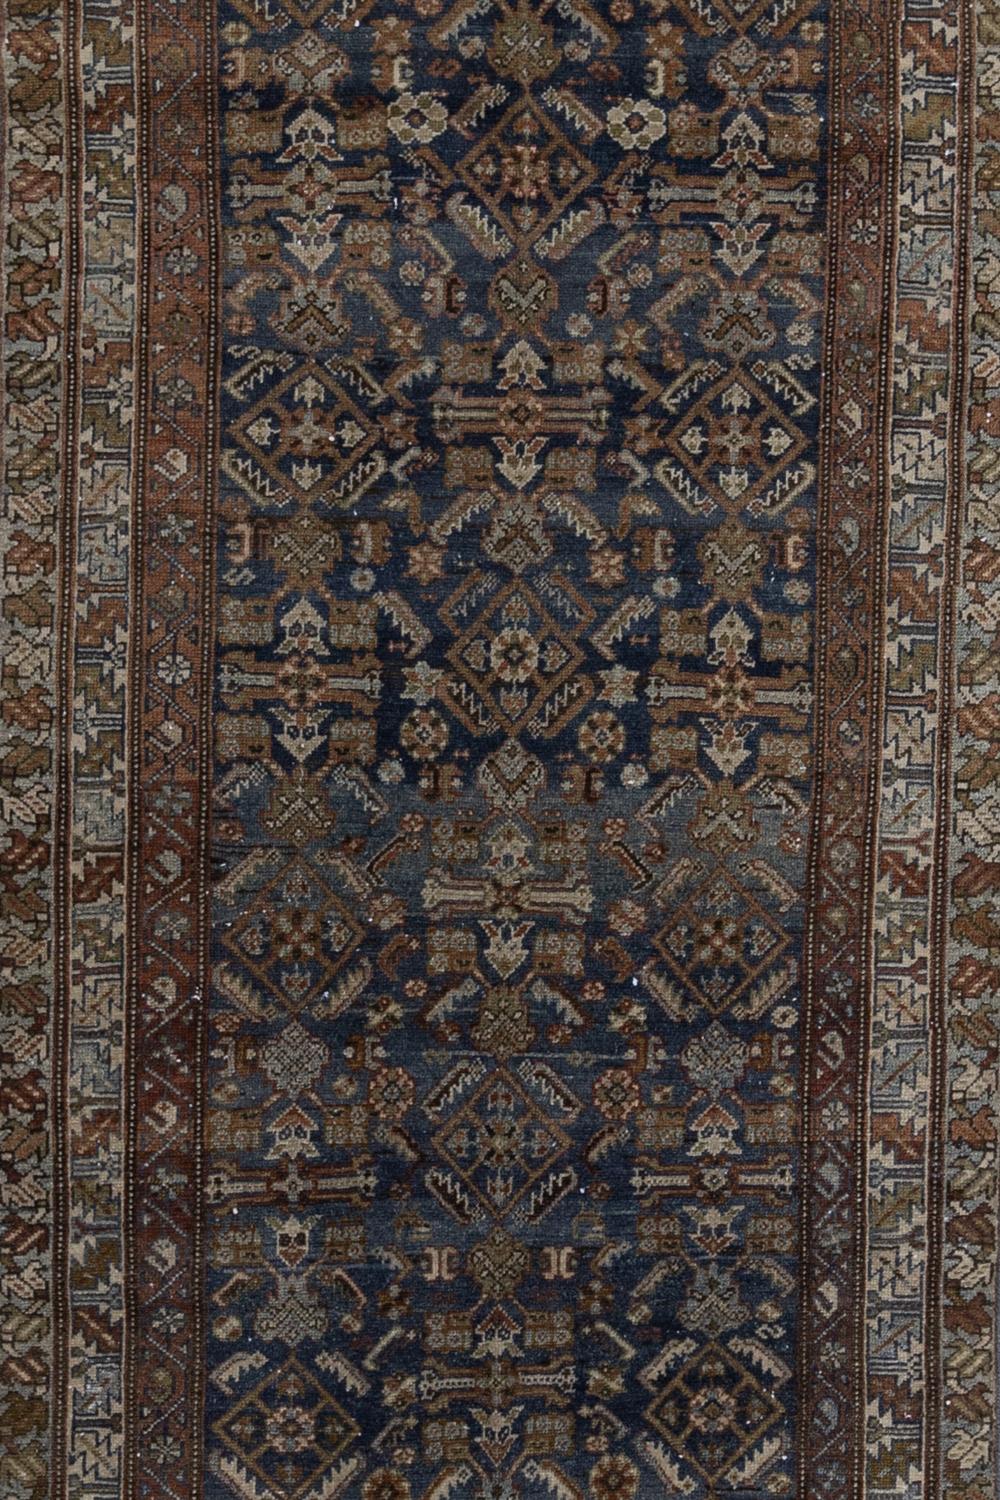 Age: early 20th century 

Pile: Low-medium 

Wear Notes: 1

Material: Wool on Cotton

Excellent condition antique Malayer with the highly sought after herati pattern on a blue field. Light antique wash for desirable color. 

Wear